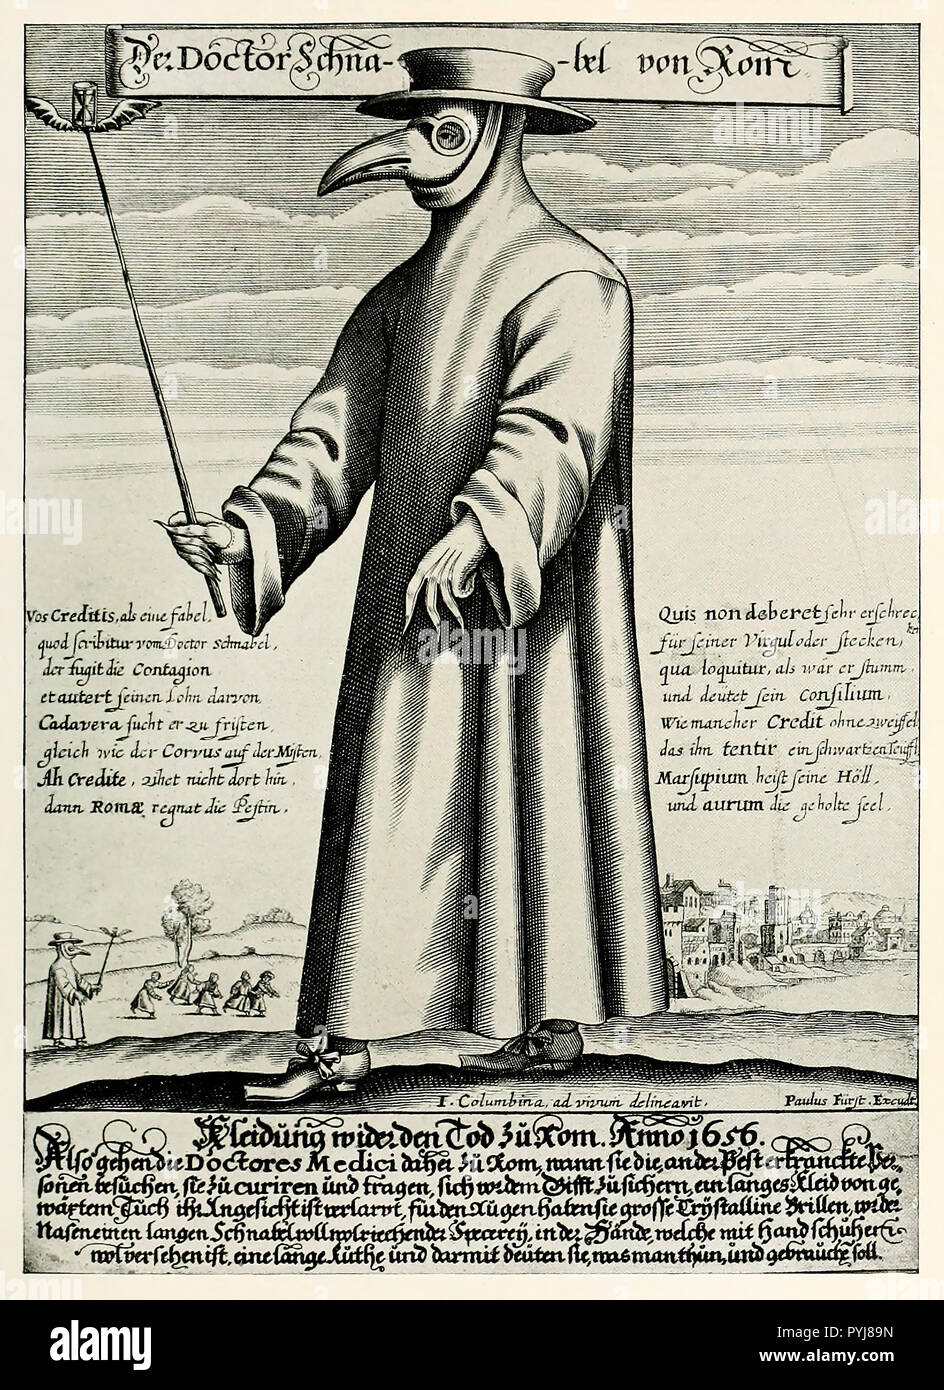 Paul Furst, Copper Engraving of Doctor Schnabel / Dr. Beak, a Plague Doctor in 17th Century Rome, Circa 1656, Print. Stock Photo